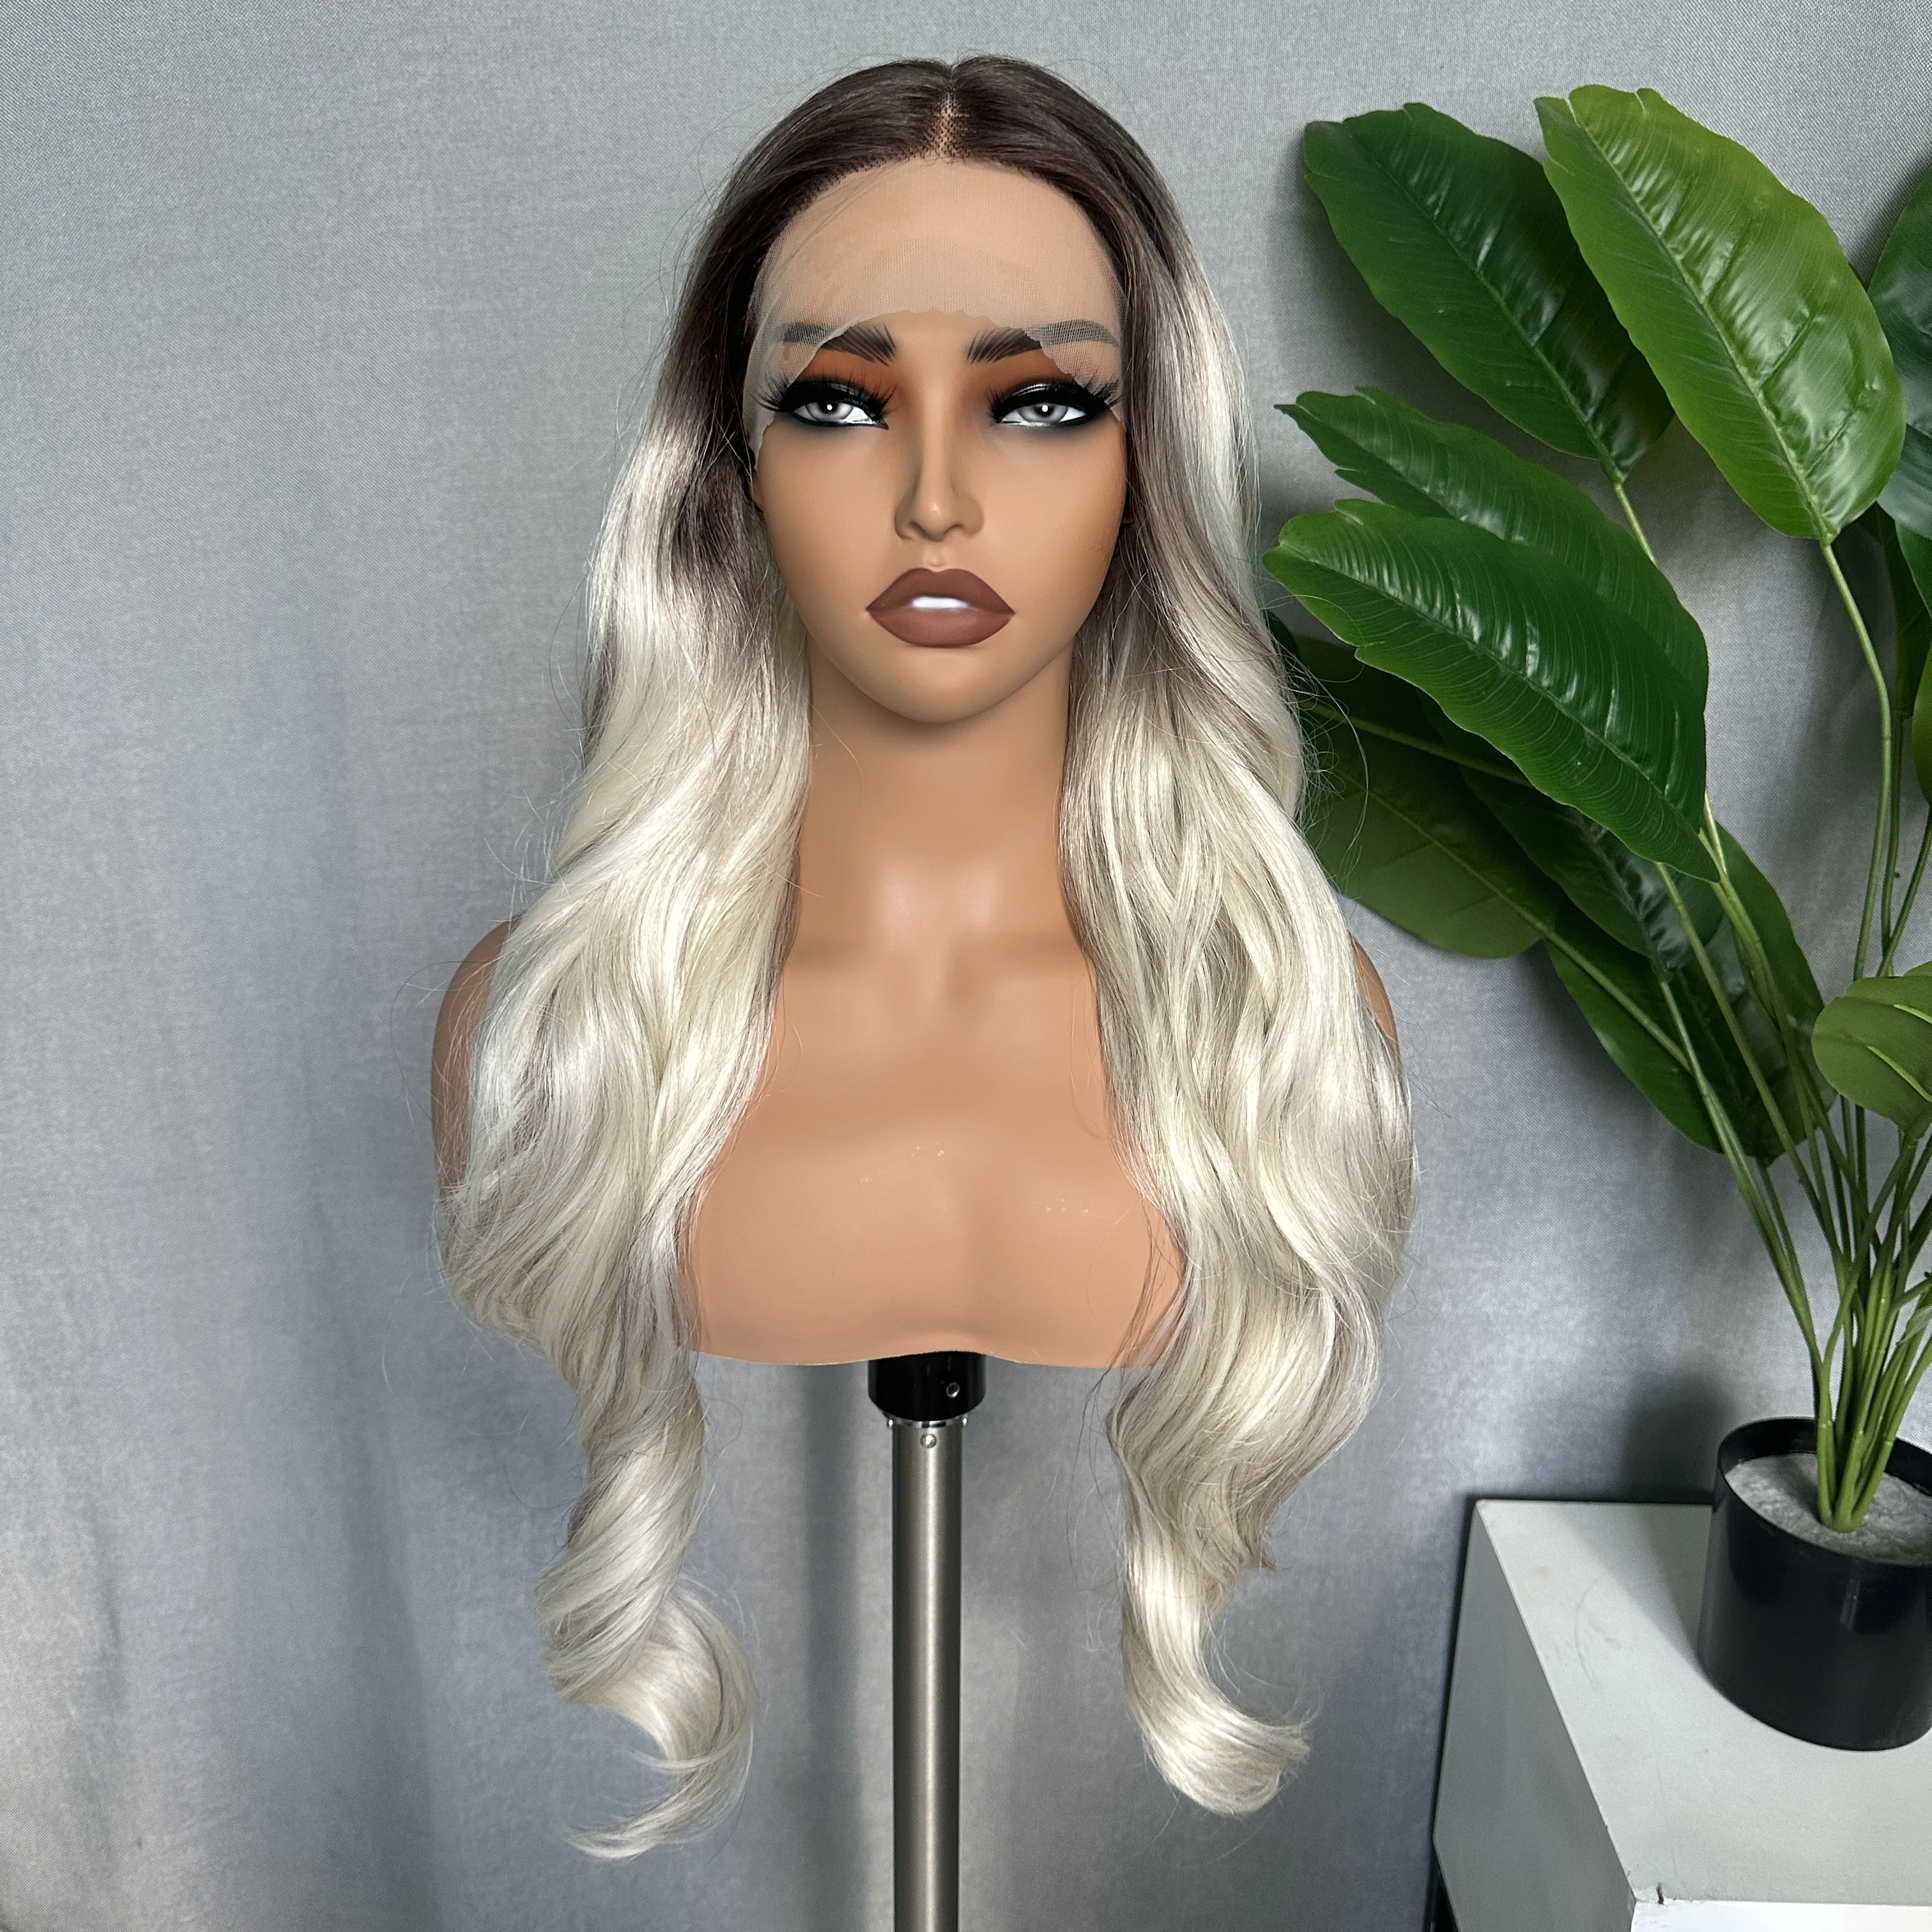 

SOKU Middle Part Lace Front Wigs Ombre Platinum Blonde Wavy Wig with Baby Hair for Women Realistic Natural Looking for Daily Use